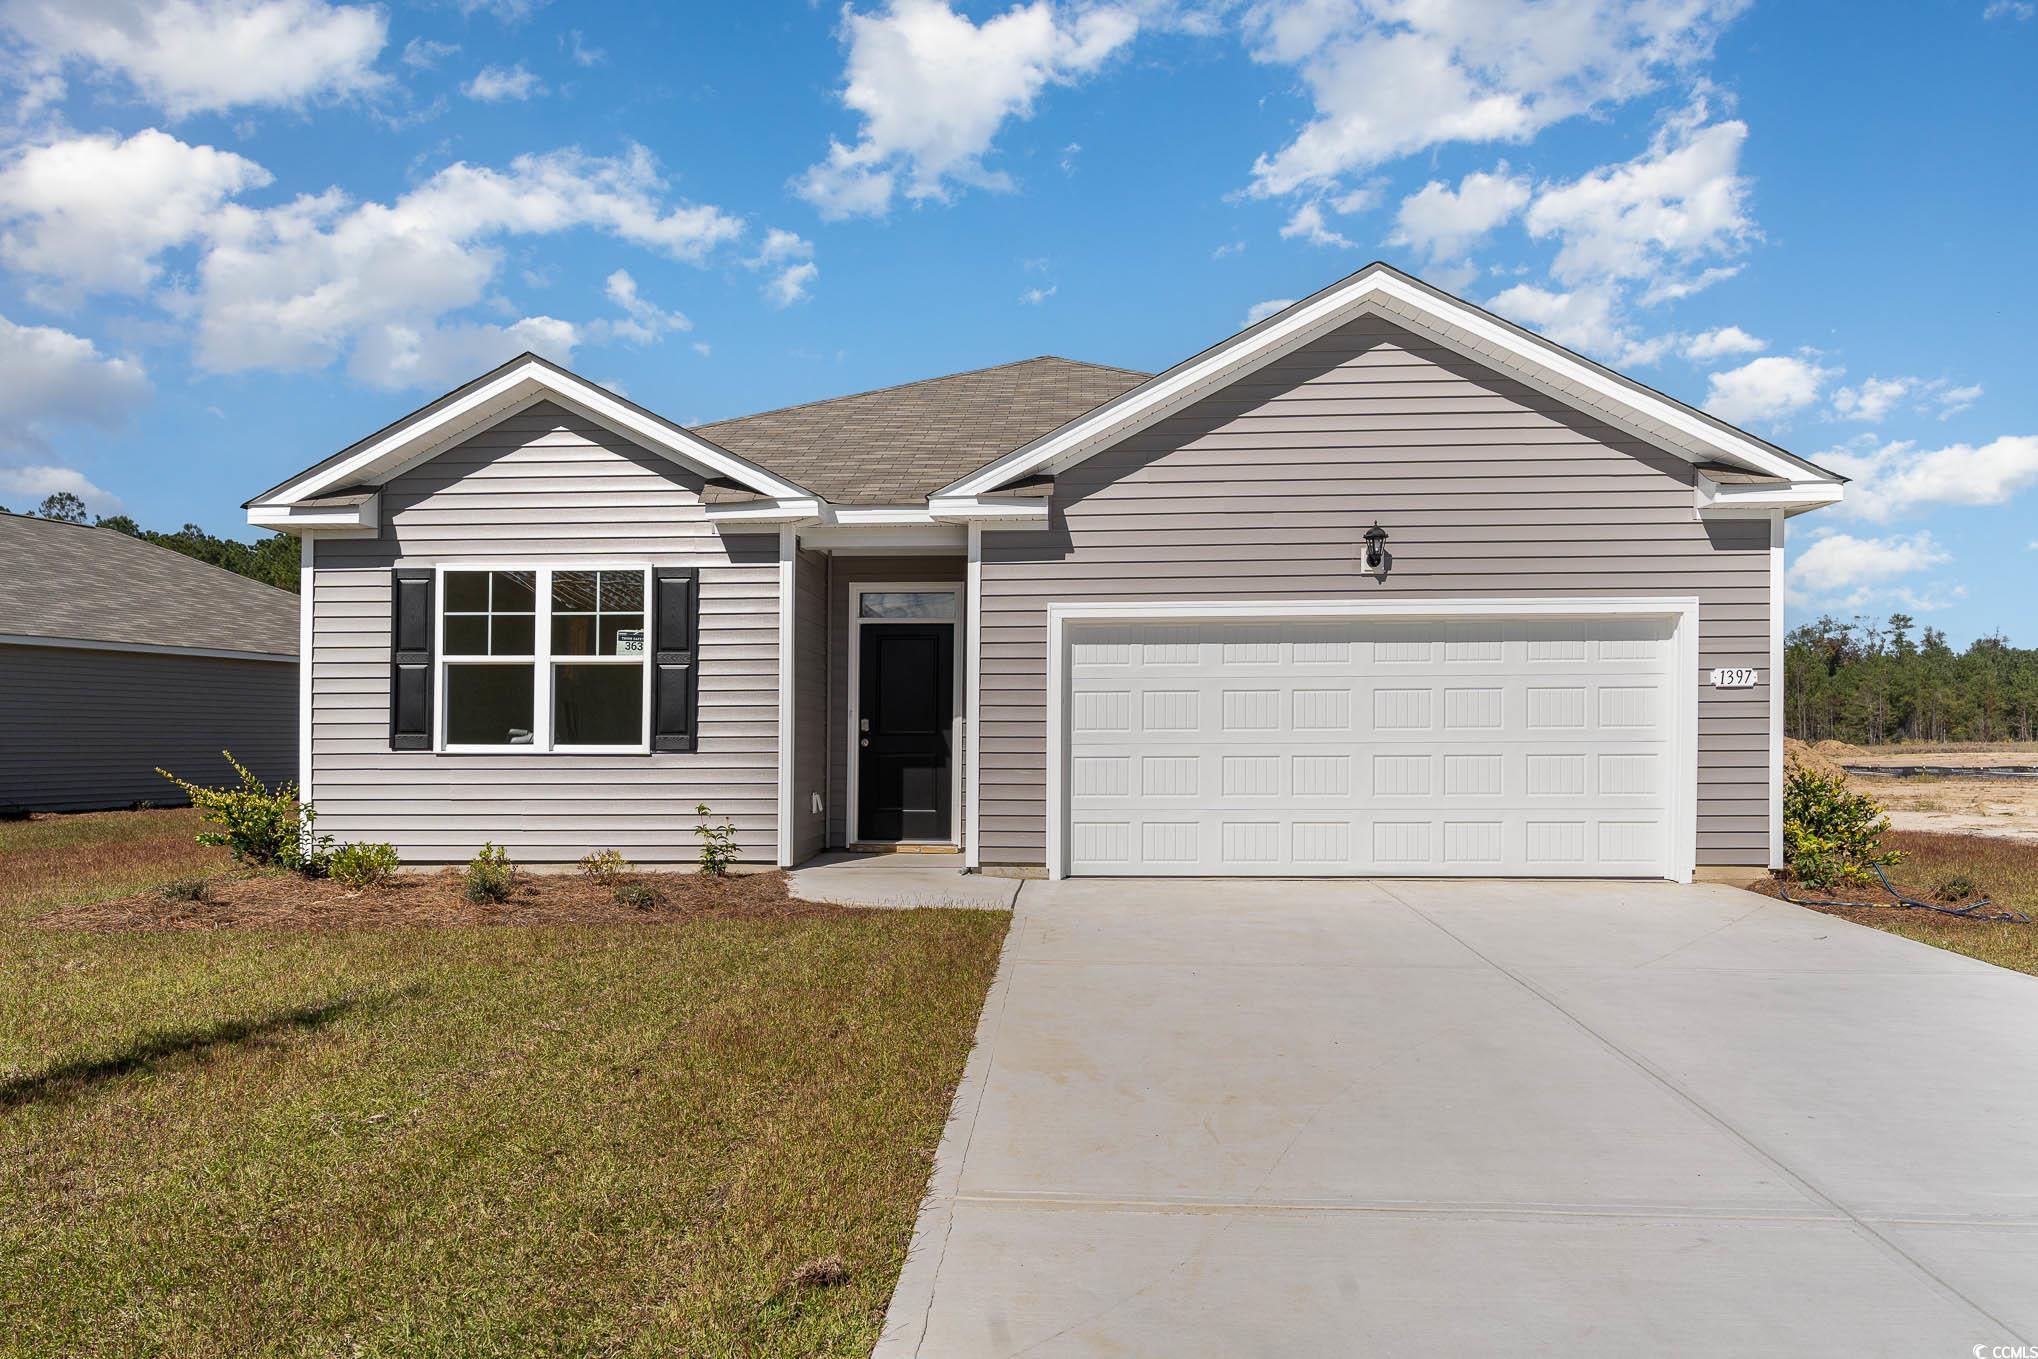 the reserve at wild horse community is conveniently located on highway 90 just minutes from downtown conway, shopping destinations, golf courses, and the beach! our cali plan is the perfect one level home with a beautiful, open concept living area for entertaining. the kitchen features granite countertops, oversized island, walk-in pantry, and stainless appliances. the large owner's suite is tucked away at the back of the home, separated from the other bedrooms, with double vanity and 5' walk-in shower in the private master bath.  spacious covered rear porch adds additional outdoor living space. ask about our home is connected package!  home is connected smart home package are also included.  *photos are of a similar cali home.  (home and community information, including pricing, included features, terms, availability and amenities, are subject to change prior to sale at any time without notice or obligation. square footages are approximate. pictures, photographs, colors, features, and sizes are for illustration purposes only and will vary from the homes as built. equal housing opportunity builder.)